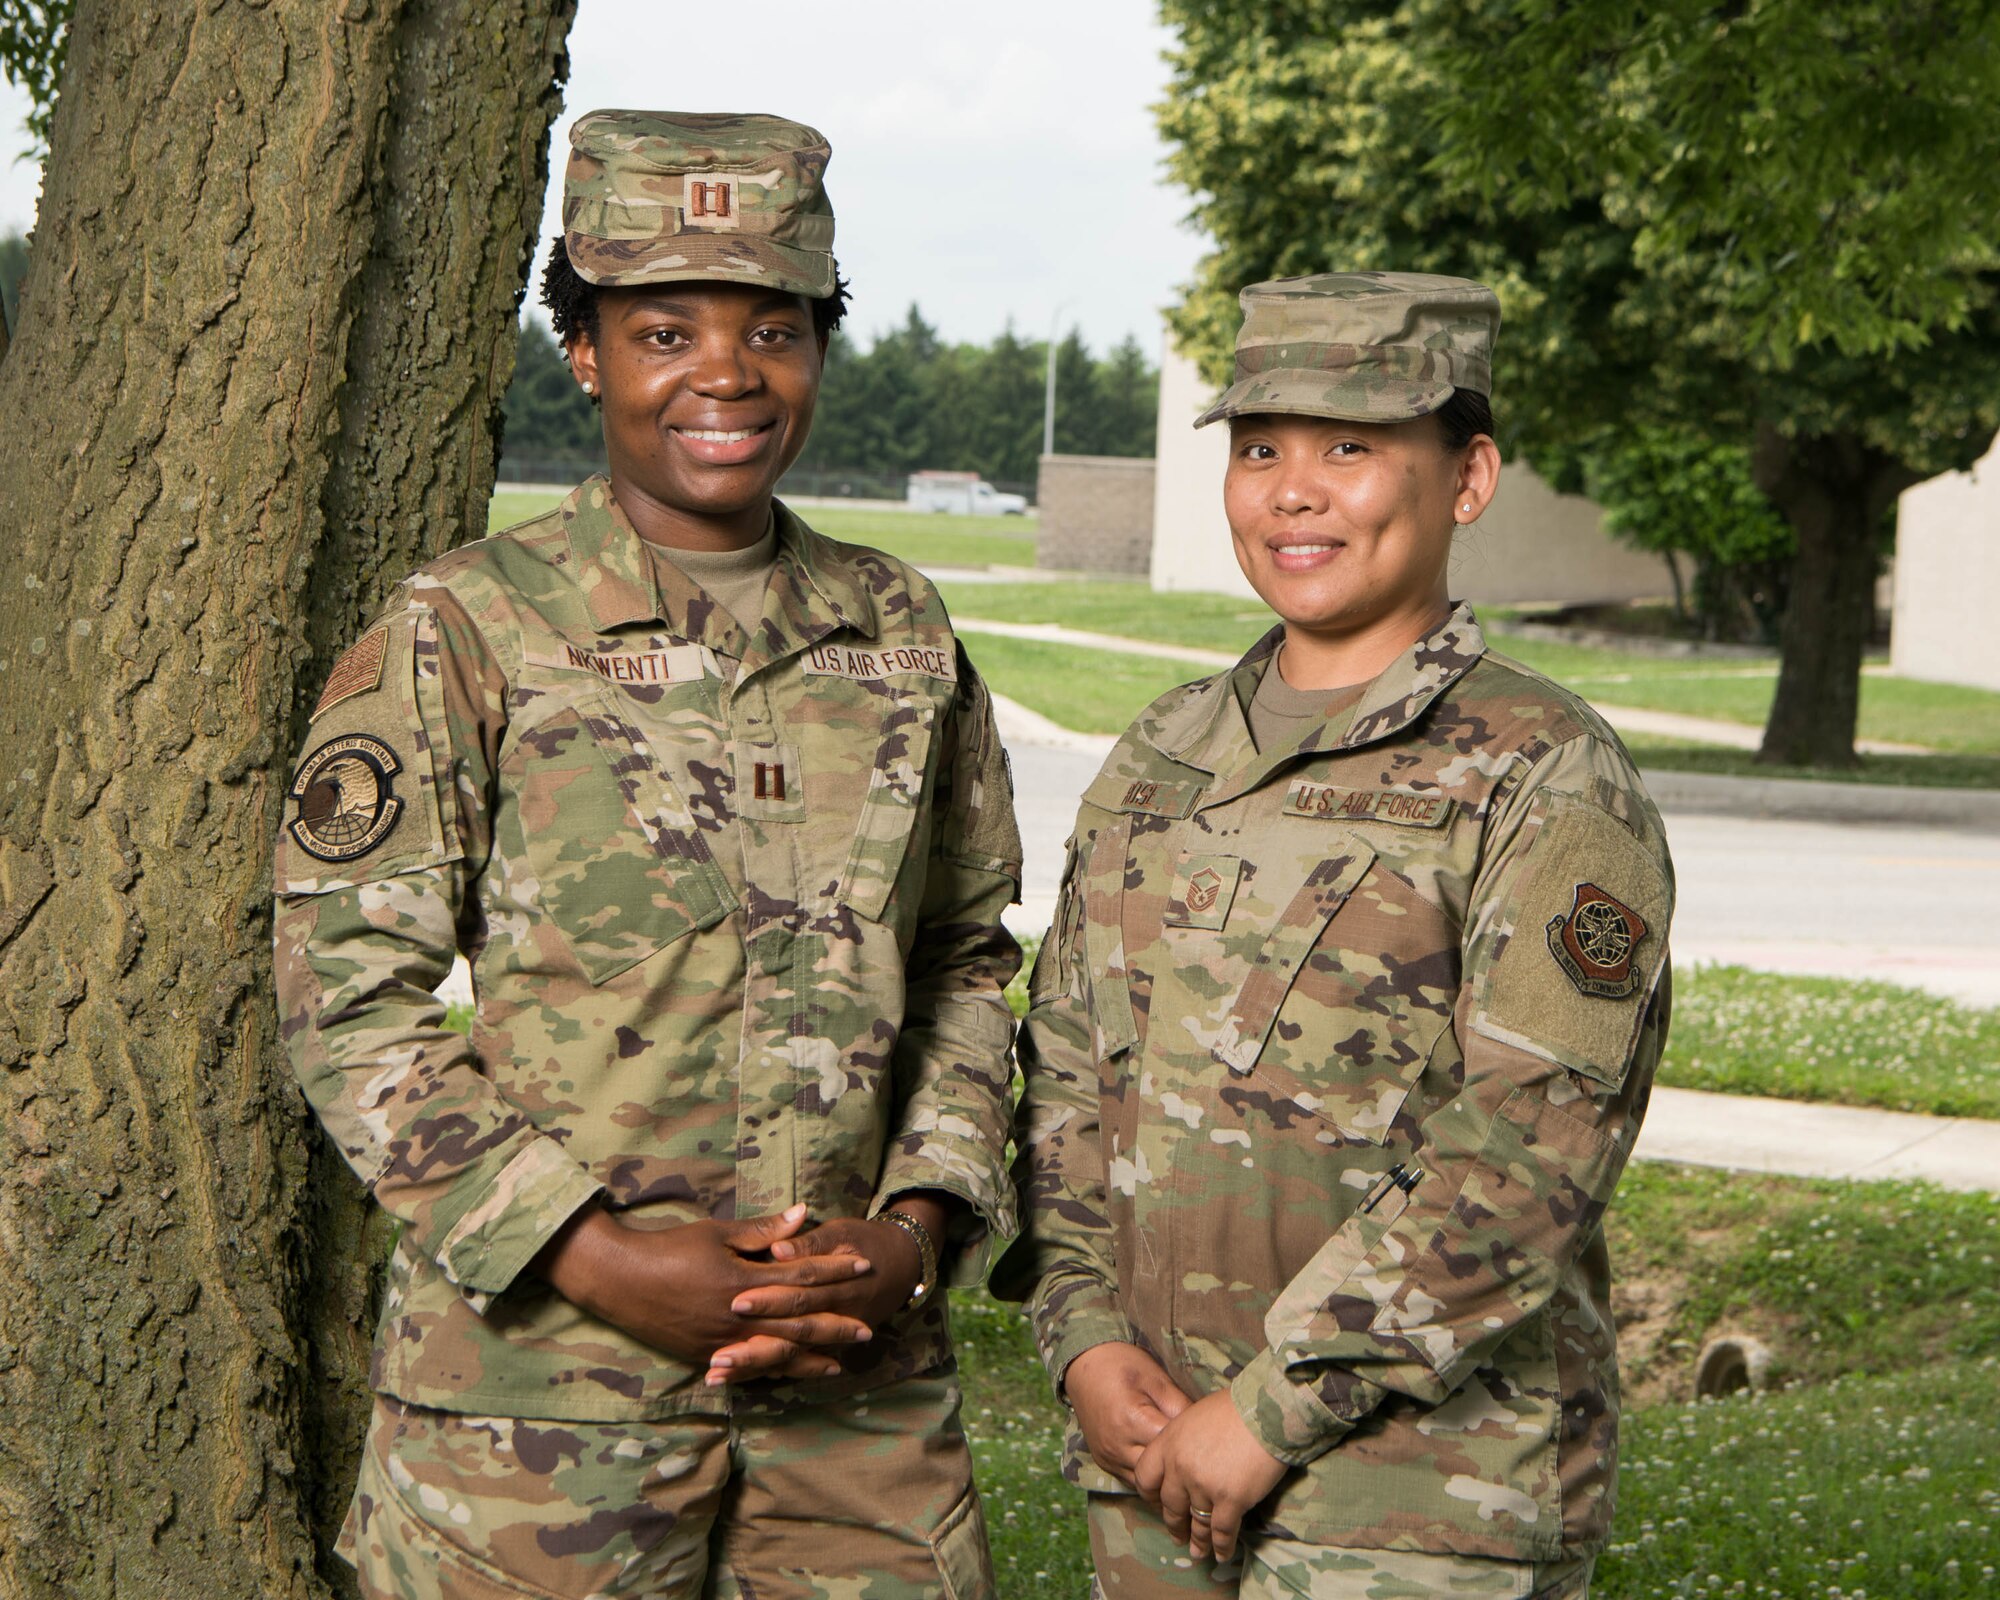 Capt. Lindamira Nkwenti, 436th Medical Support Squadron resource management flight commander, and Master Sgt. Jaerynne Rose, 436th Airlift Wing commander's action group superintendent, installation project officers for the 2021 Air Force Assistance Fund campaign, Dover Air Force Base, Delaware, June 9, 2021. Dover placed first in Air Mobility Command for active duty participation and 10th Air Force wide. (U.S. Air Force photo by Mauricio Campino)